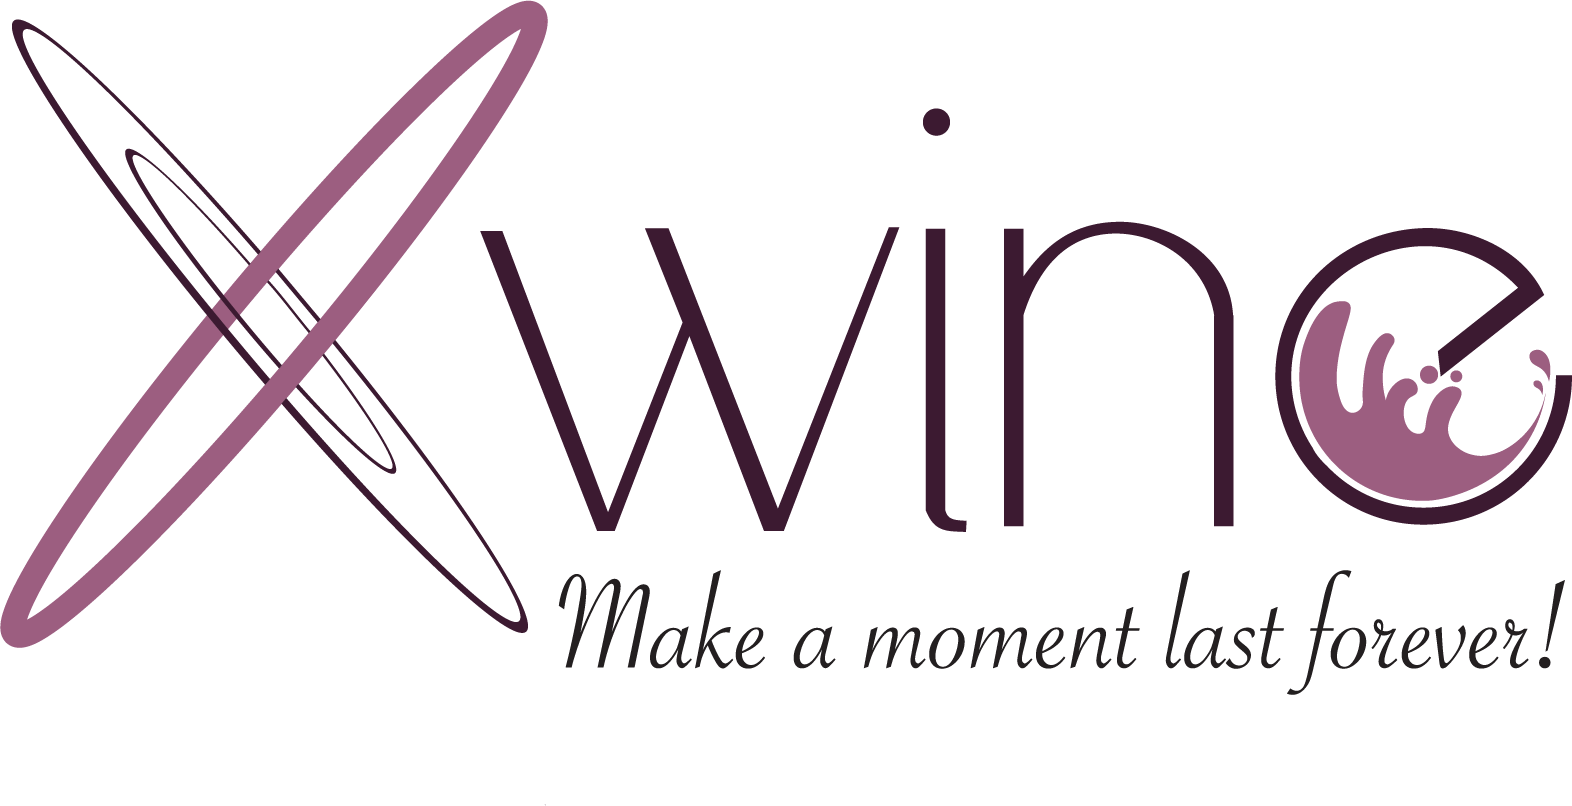 Xwine make a moment last forever!